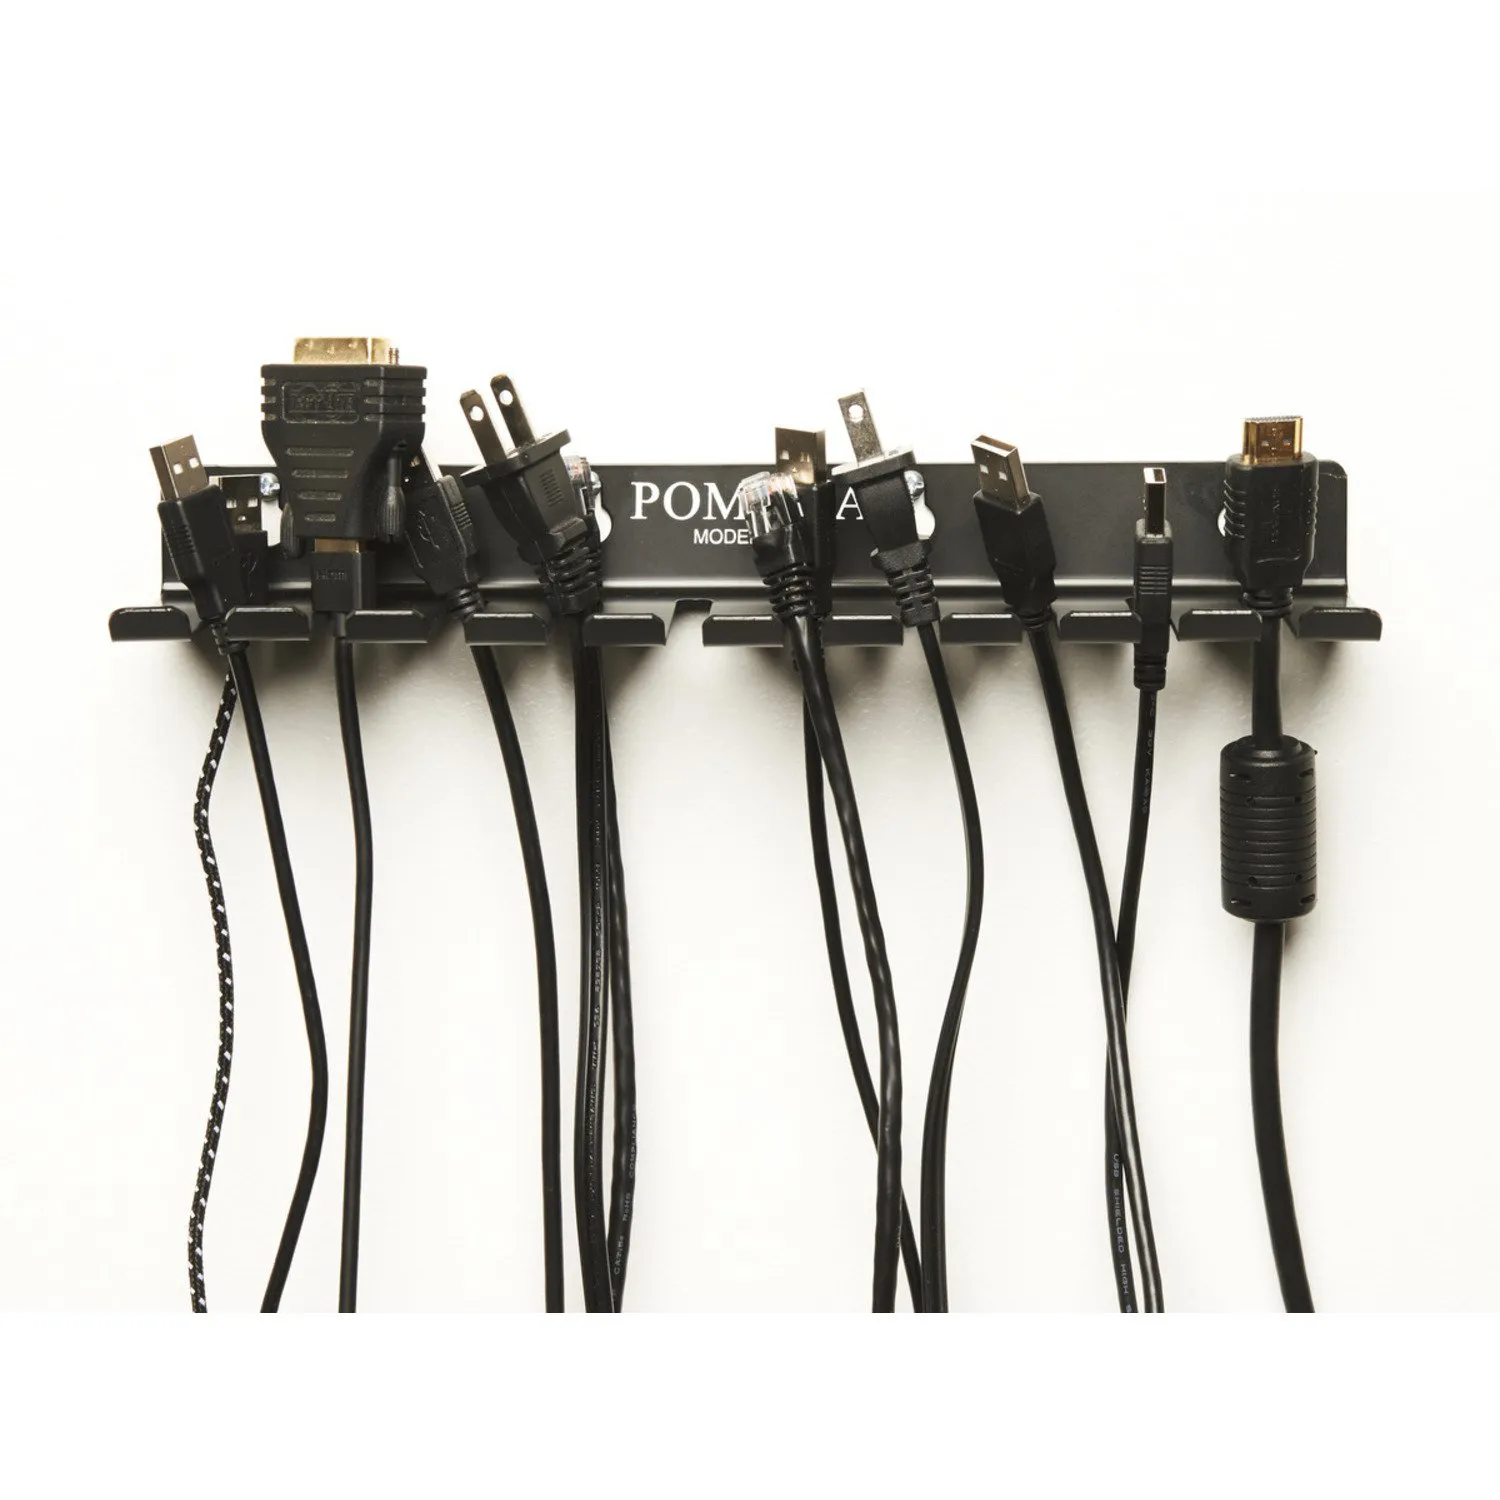 Photo of Pomona Test Lead Holder - For cables up to .32 / 0 AWG diameter [Black - POM-4408]